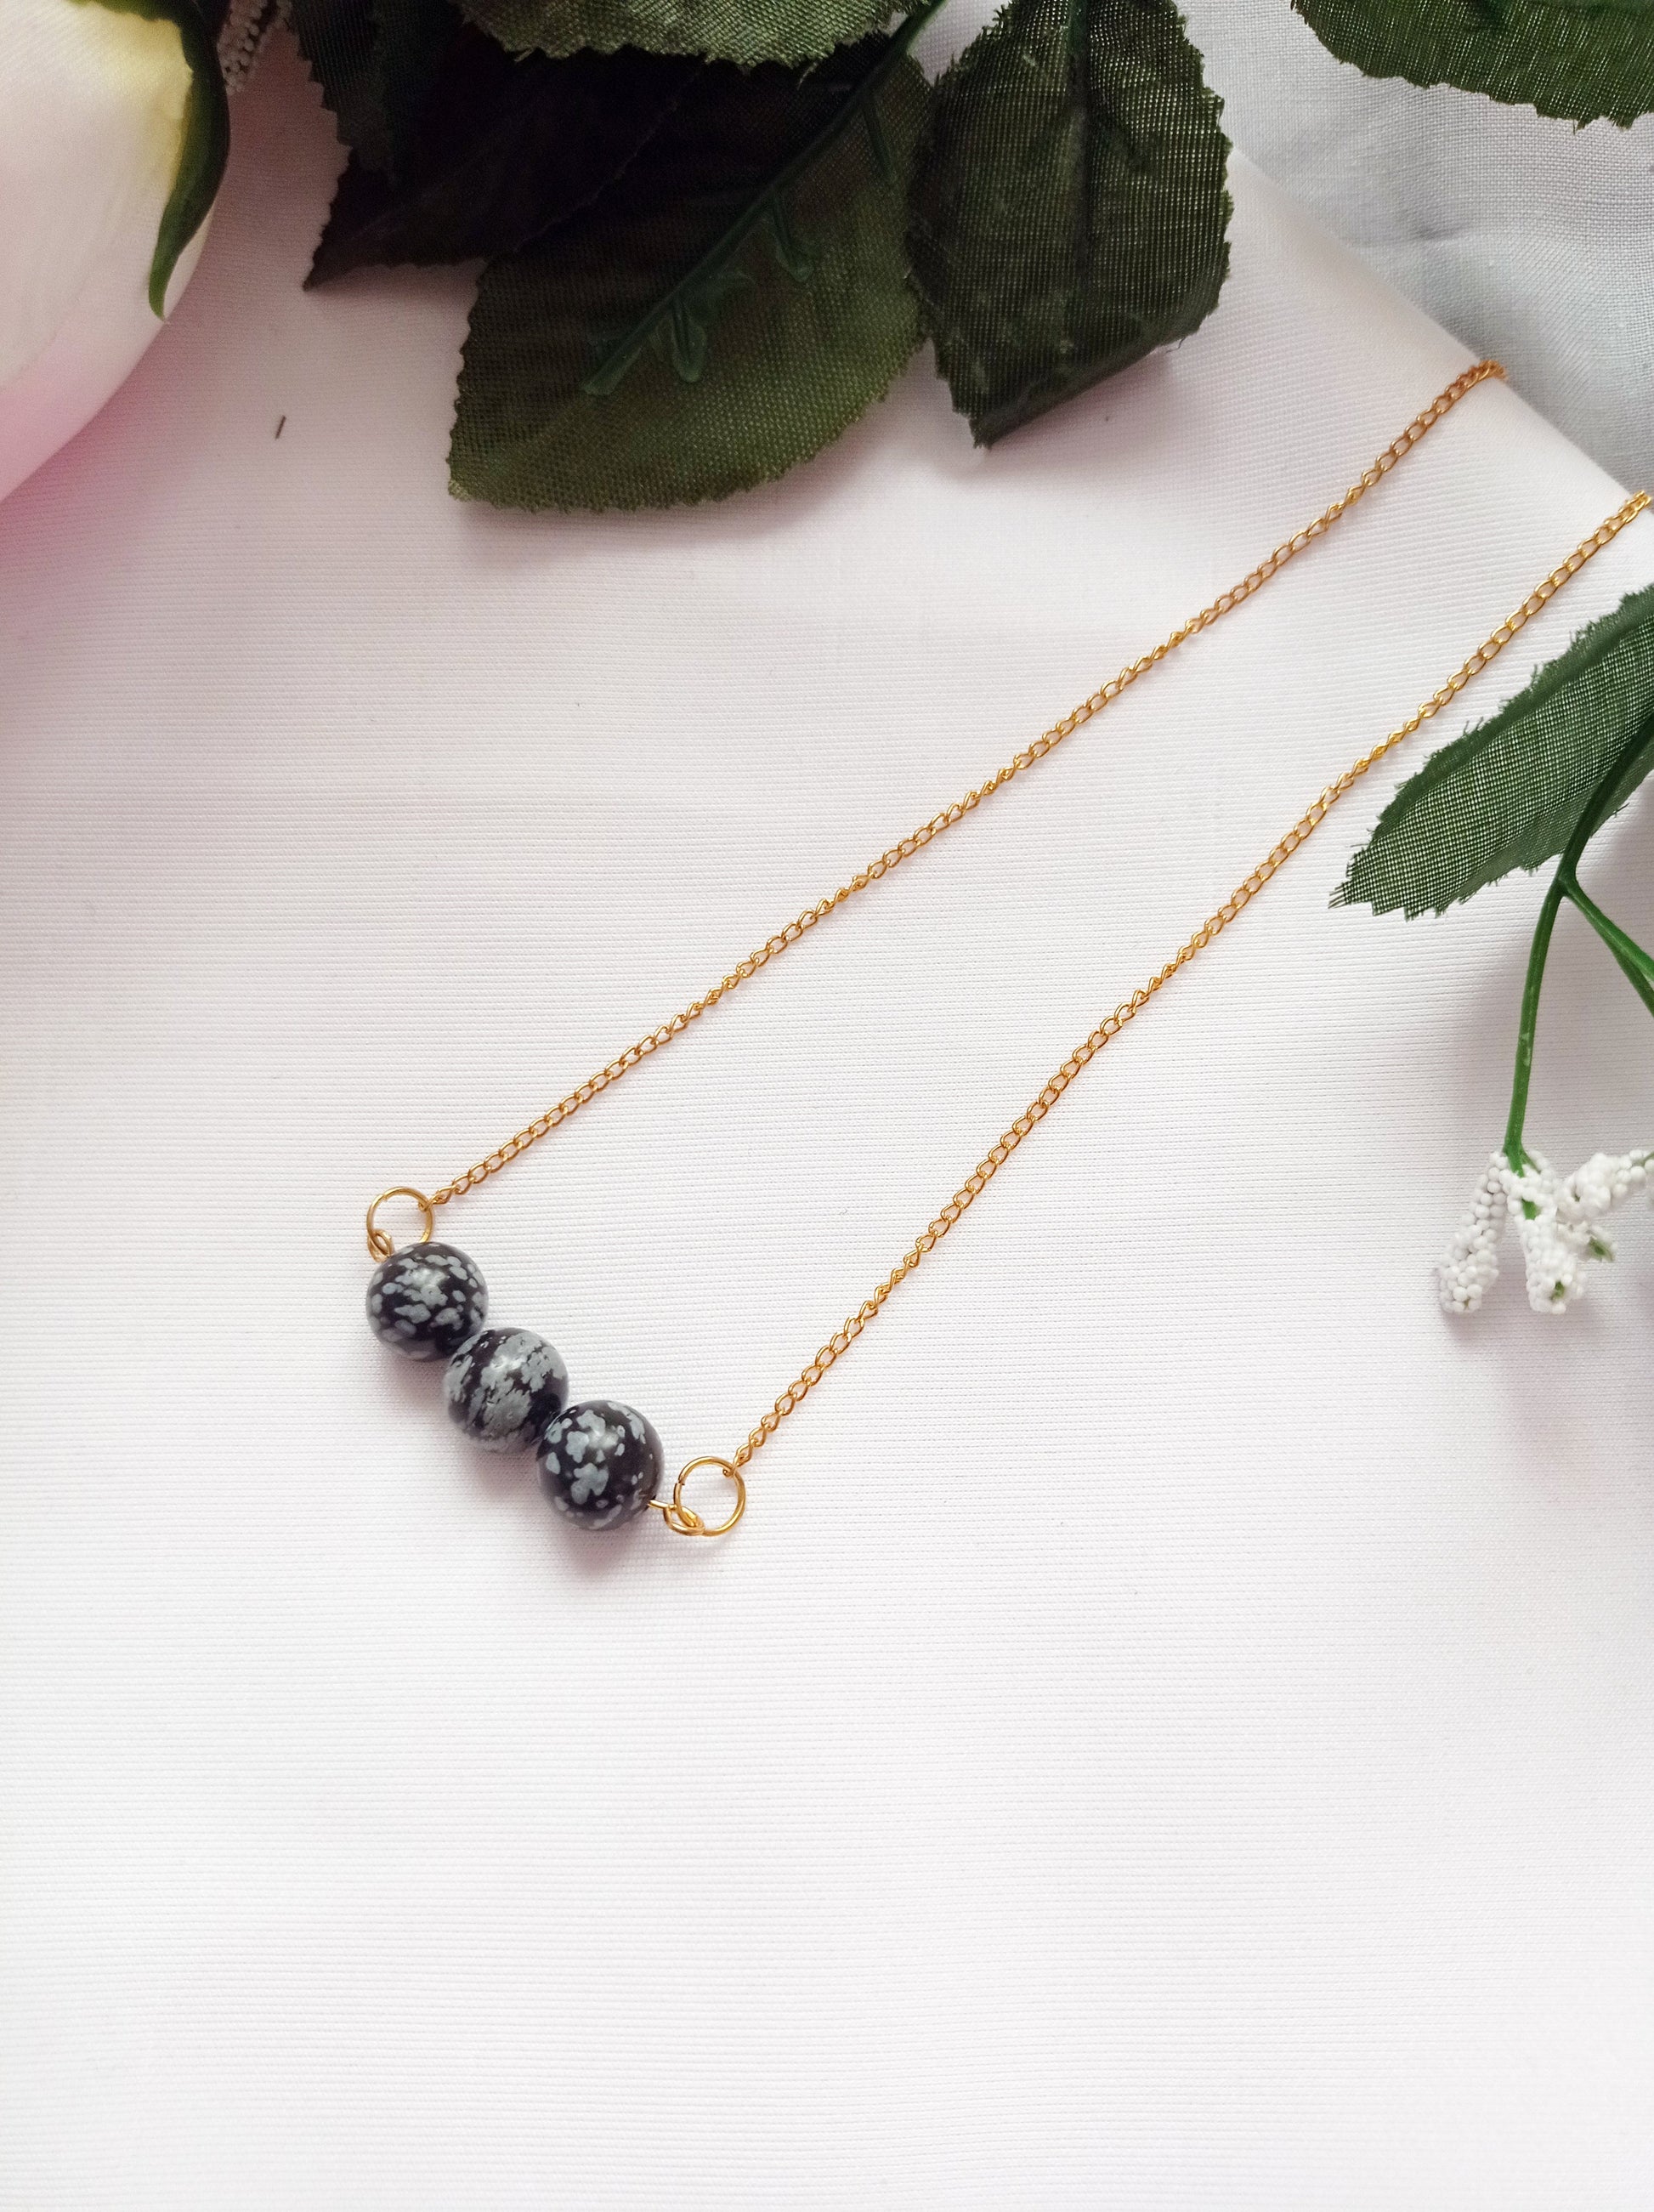 Snowflake Obsidian Yellow Gold Vermeil Necklace, Snowflake Obsidian Bar Necklace, Gemstone Bar Necklace, Pendant Necklace | by nlanlaVictory-5